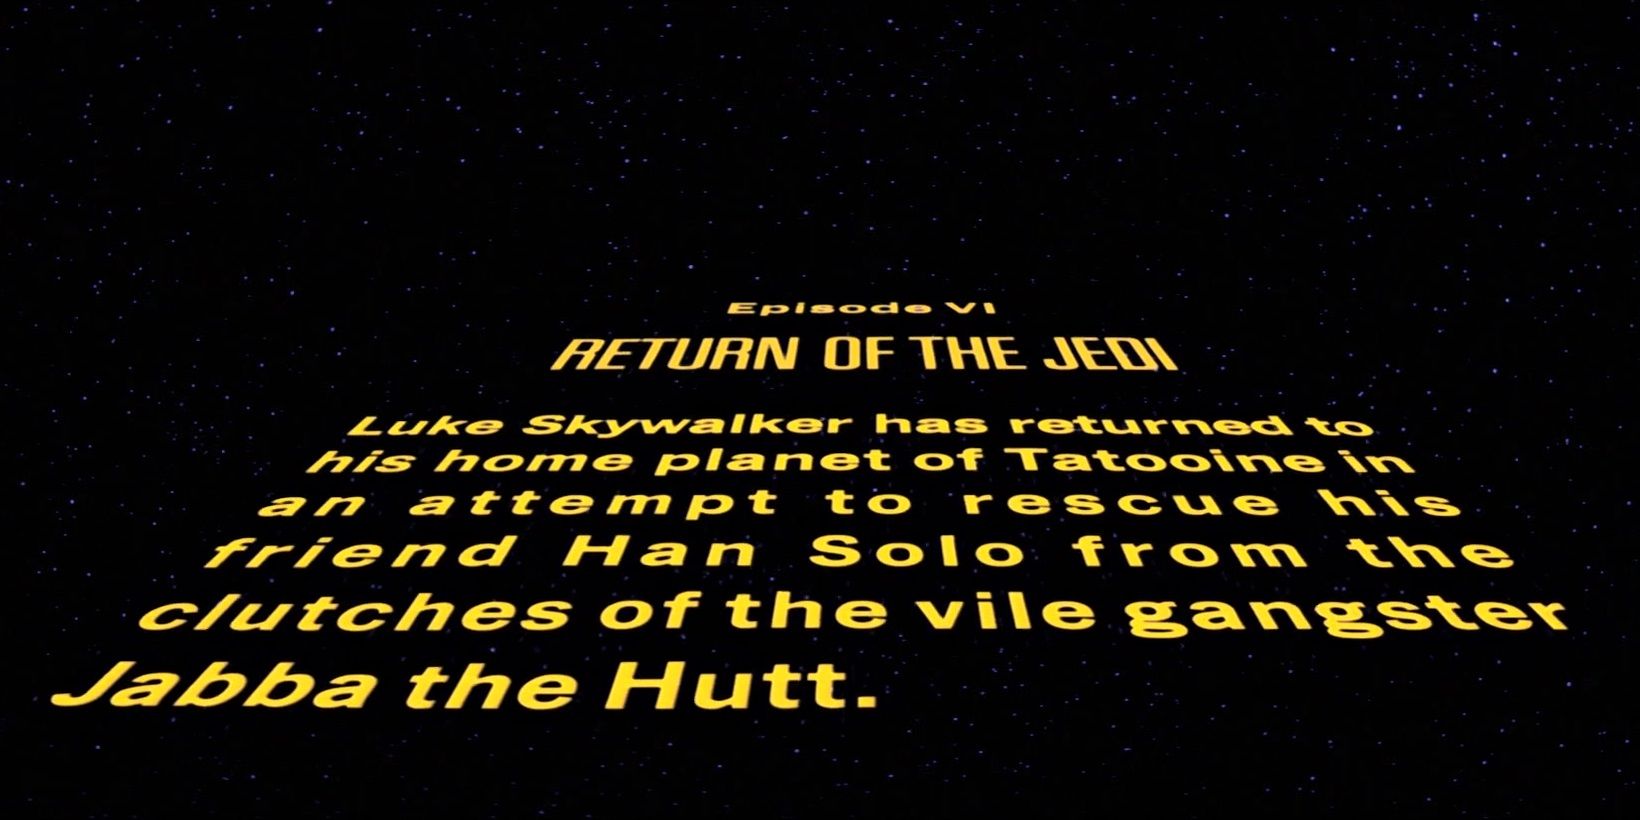 The opening text crawl in Return of the Jedi